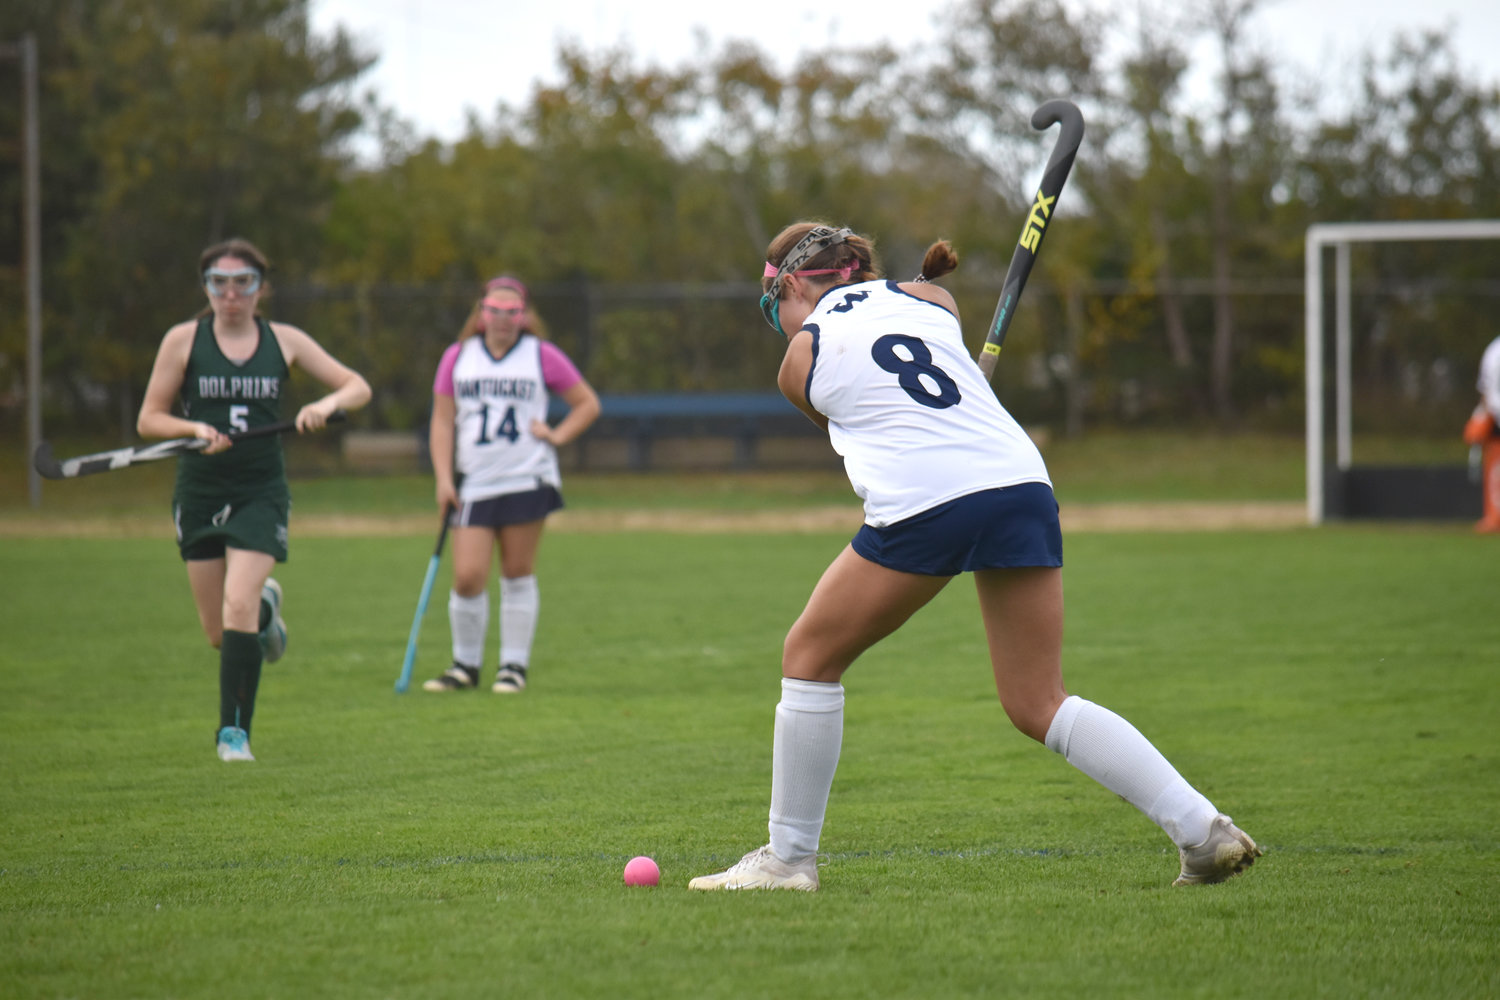 Freshman midfielder Lillian Wullschleger drives the ball down the field during the JV team’s Oct. 25 home game against Dennis-Yarmouth.